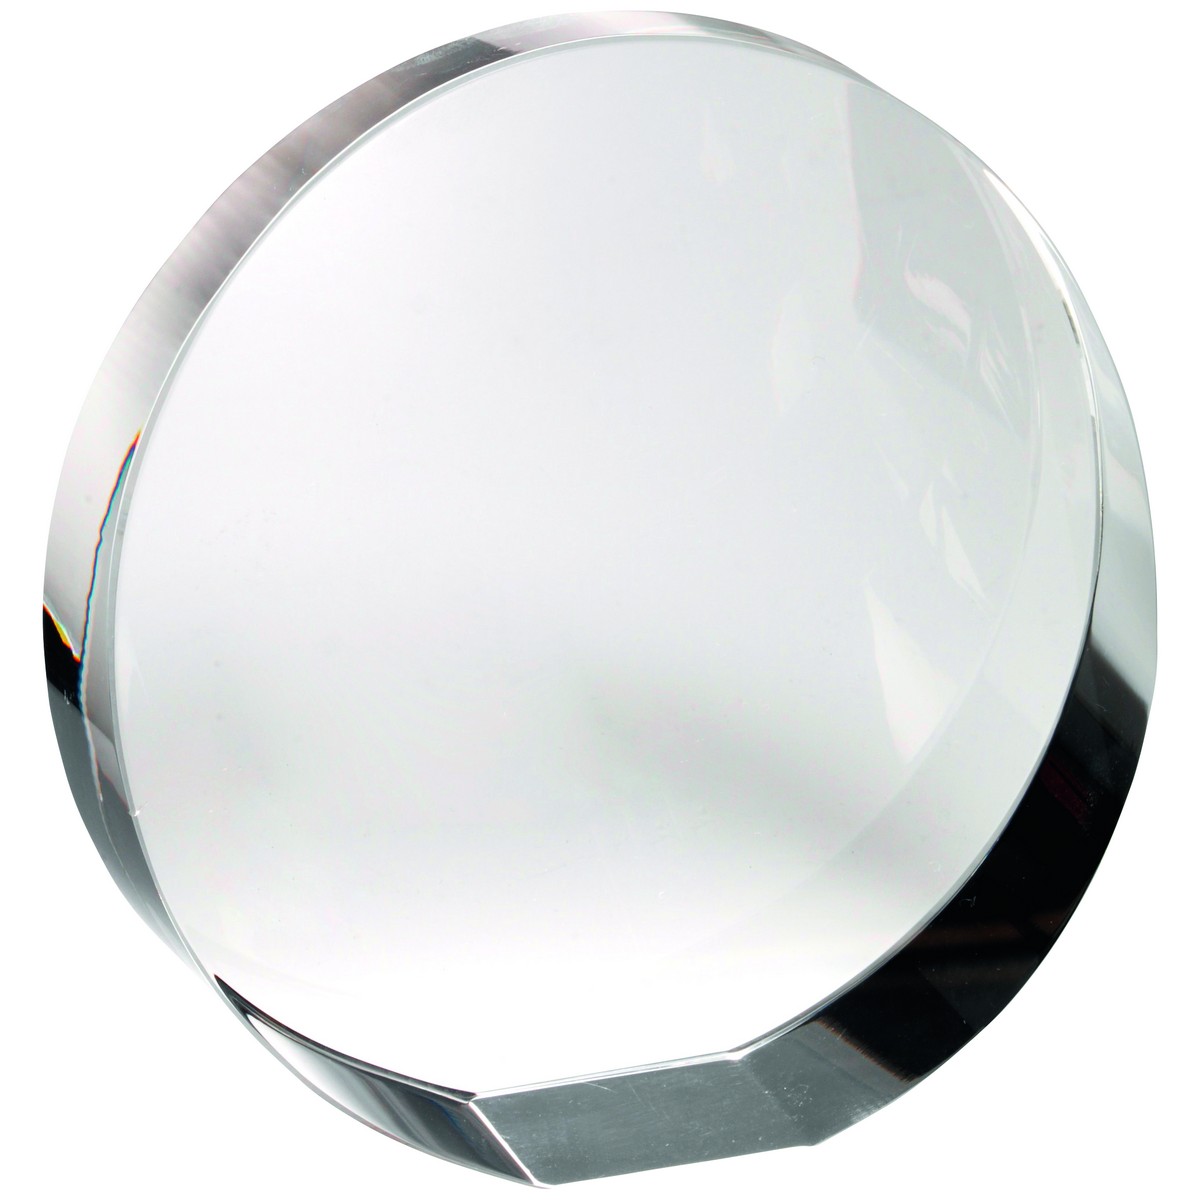 CLEAR GLASS ROUND WEDGED PAPERWEIGHT (STANDING OR FLAT)